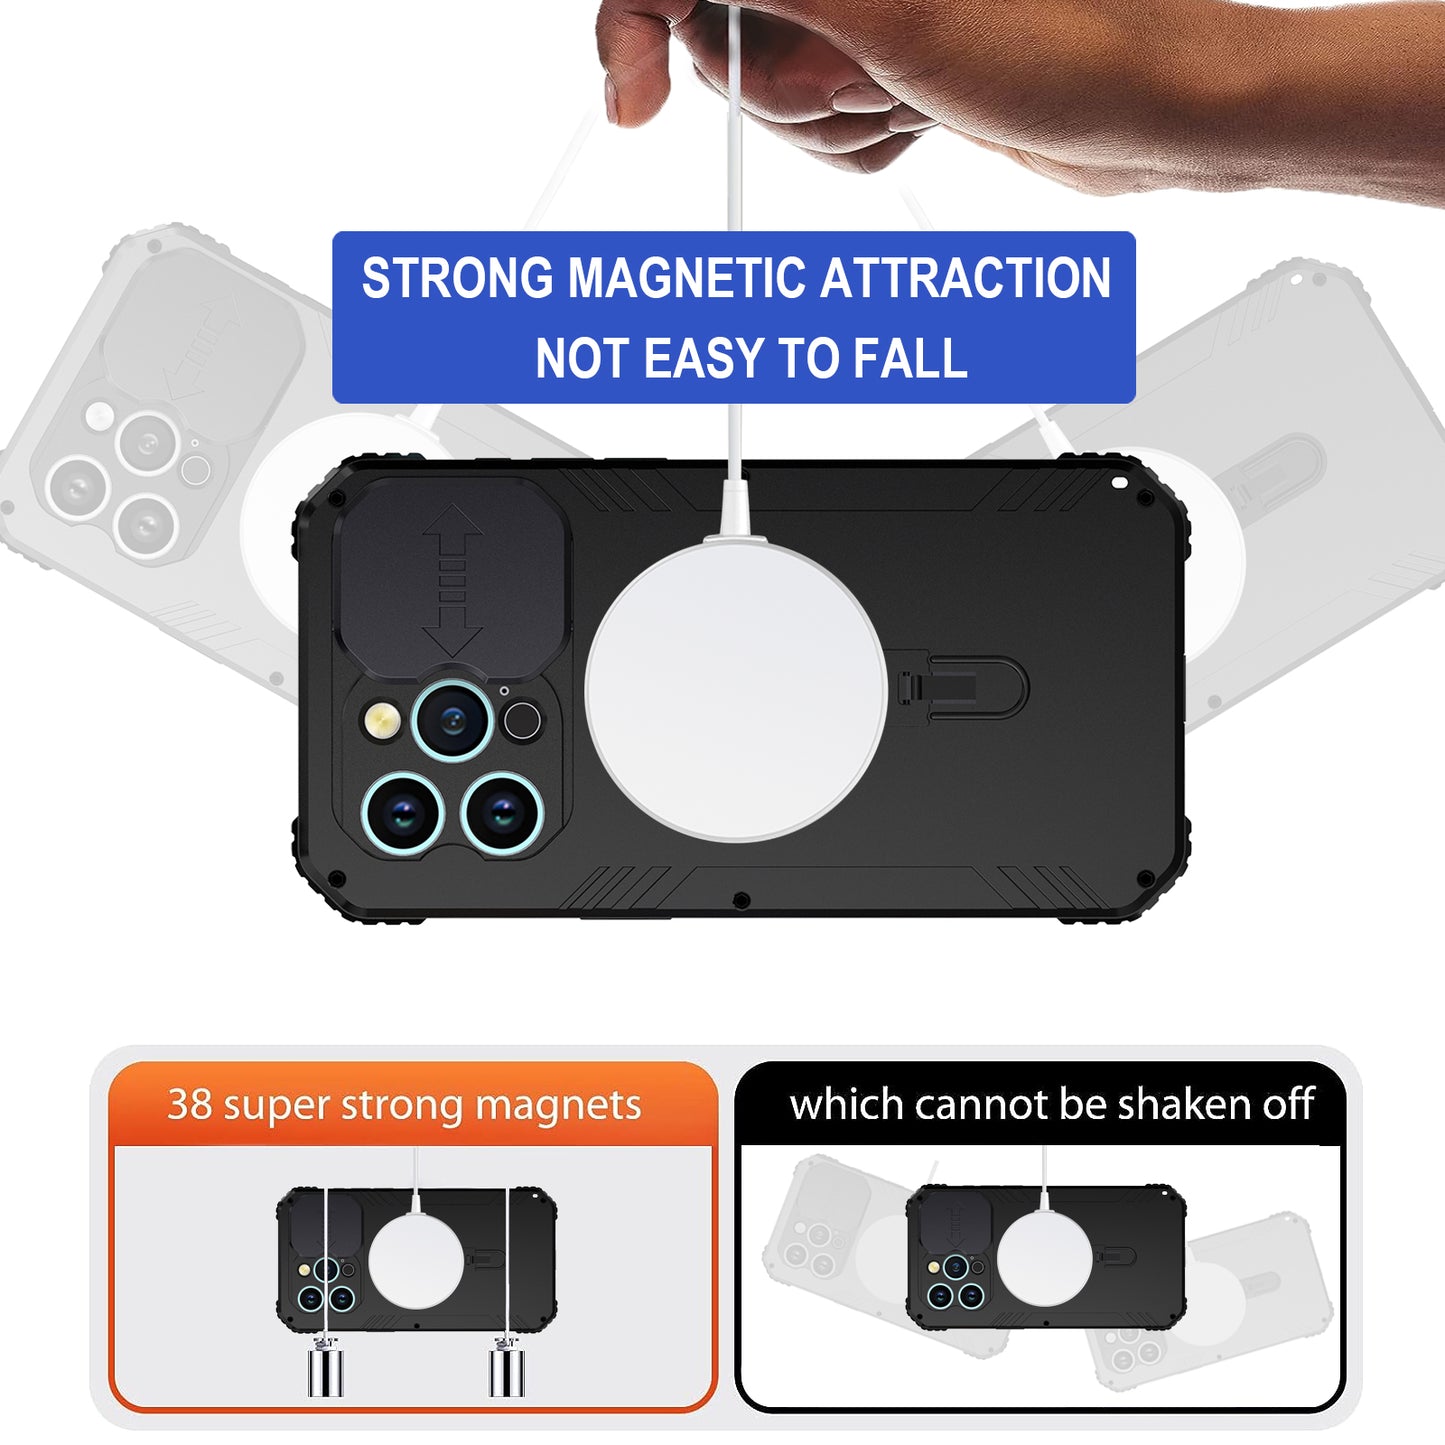 Luxury Military Apple iPhone 15 Pro Max Magsafe Case 360 Rugged Armor Bumper Metal Camera Lens Slide Cover Kickstand